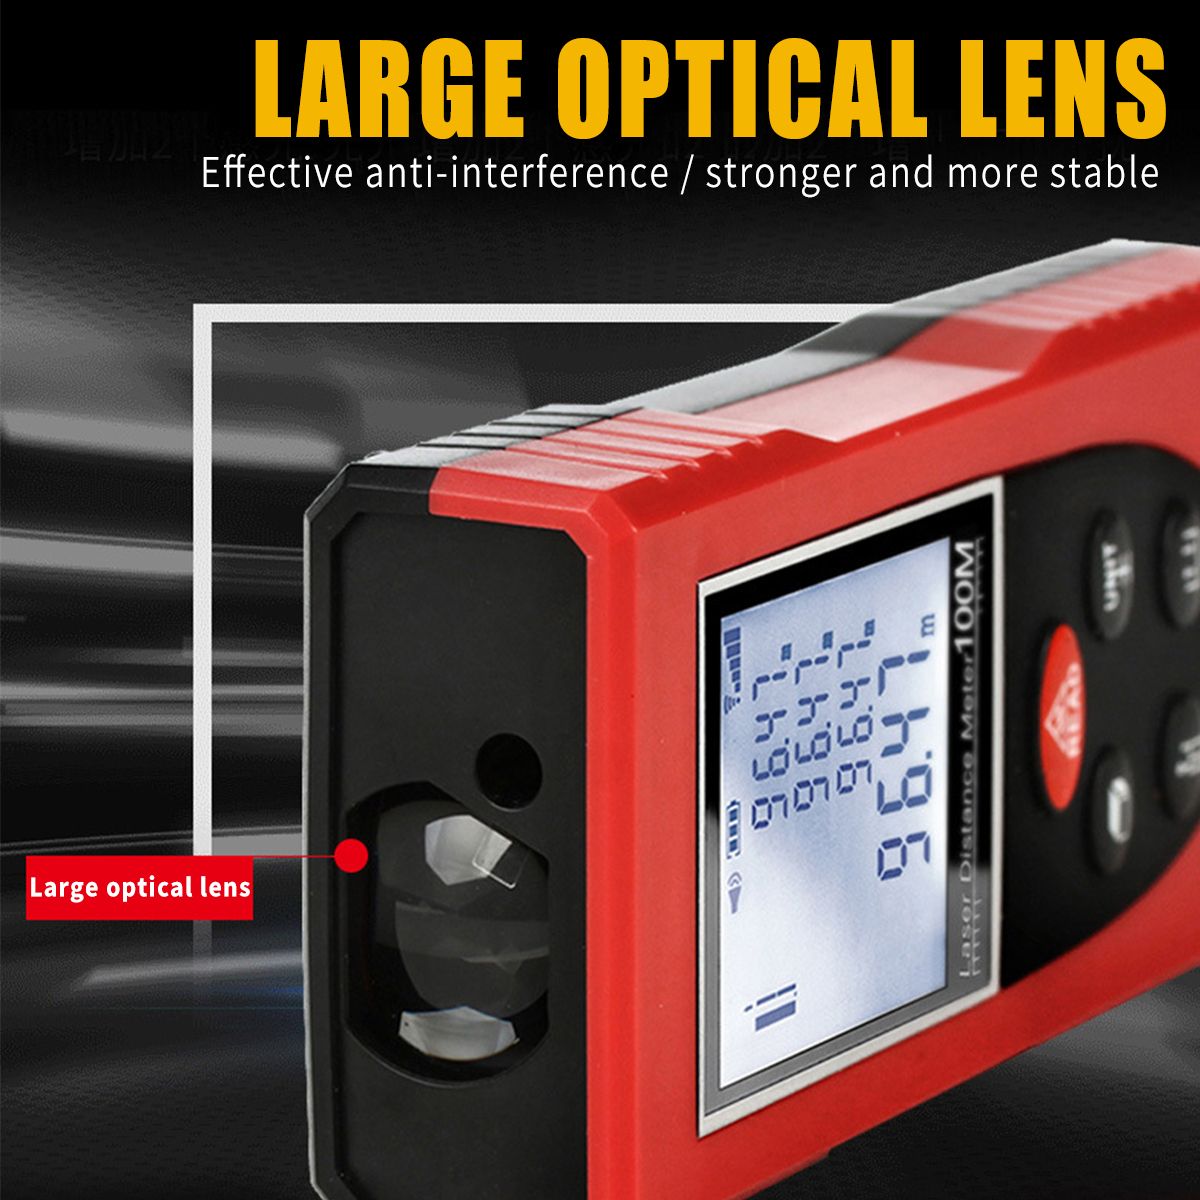 40M-Rangefinder-Infrared-Measuring-Instrument-Small-High-precision-Electronic-Ruler-Laser-Distance-M-1642107